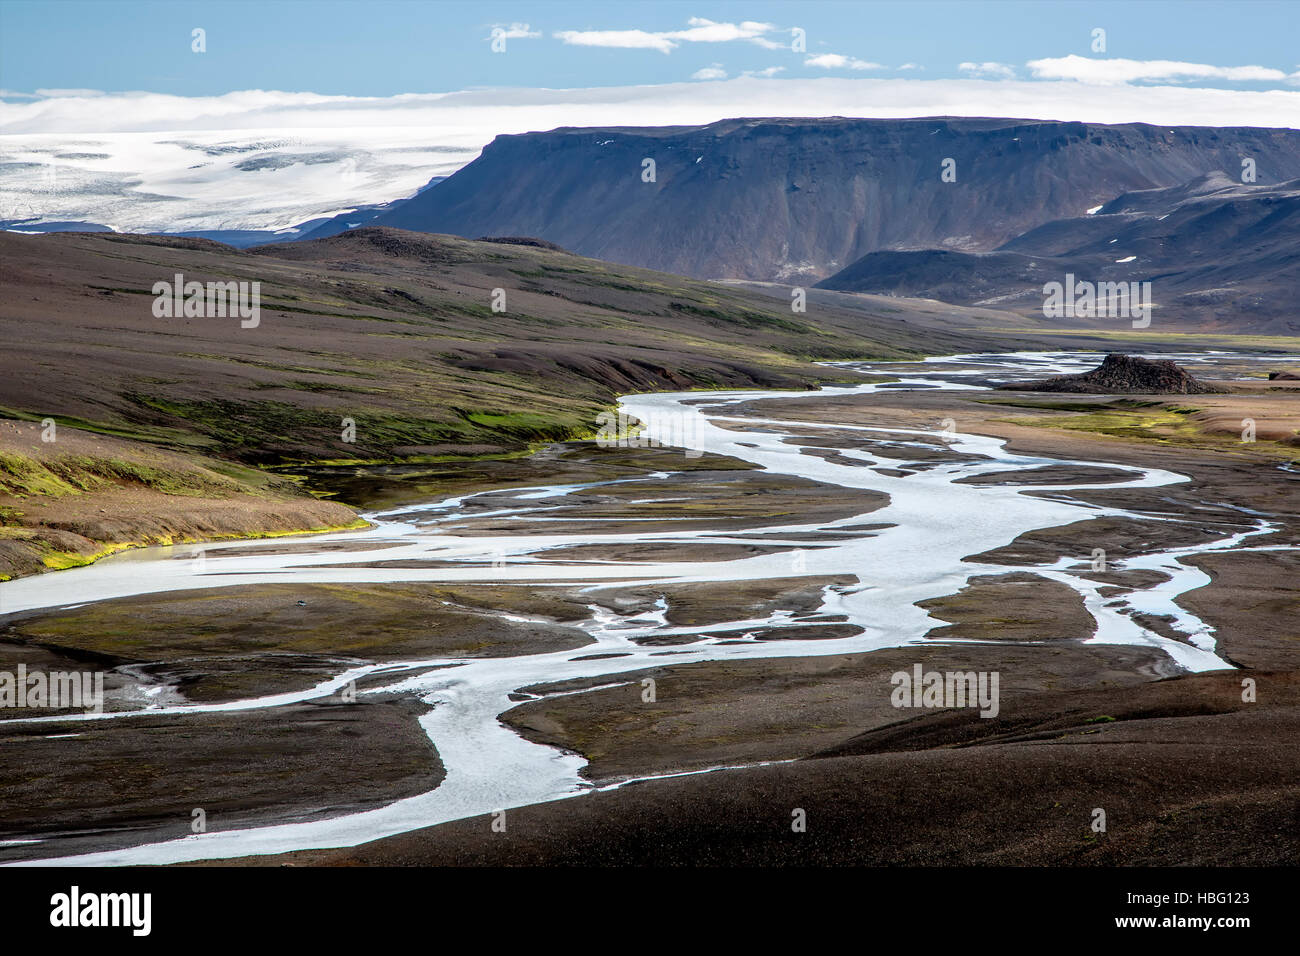 Braided river and butte in the distance, near Kerlingarfjoll, Iceland Stock Photo